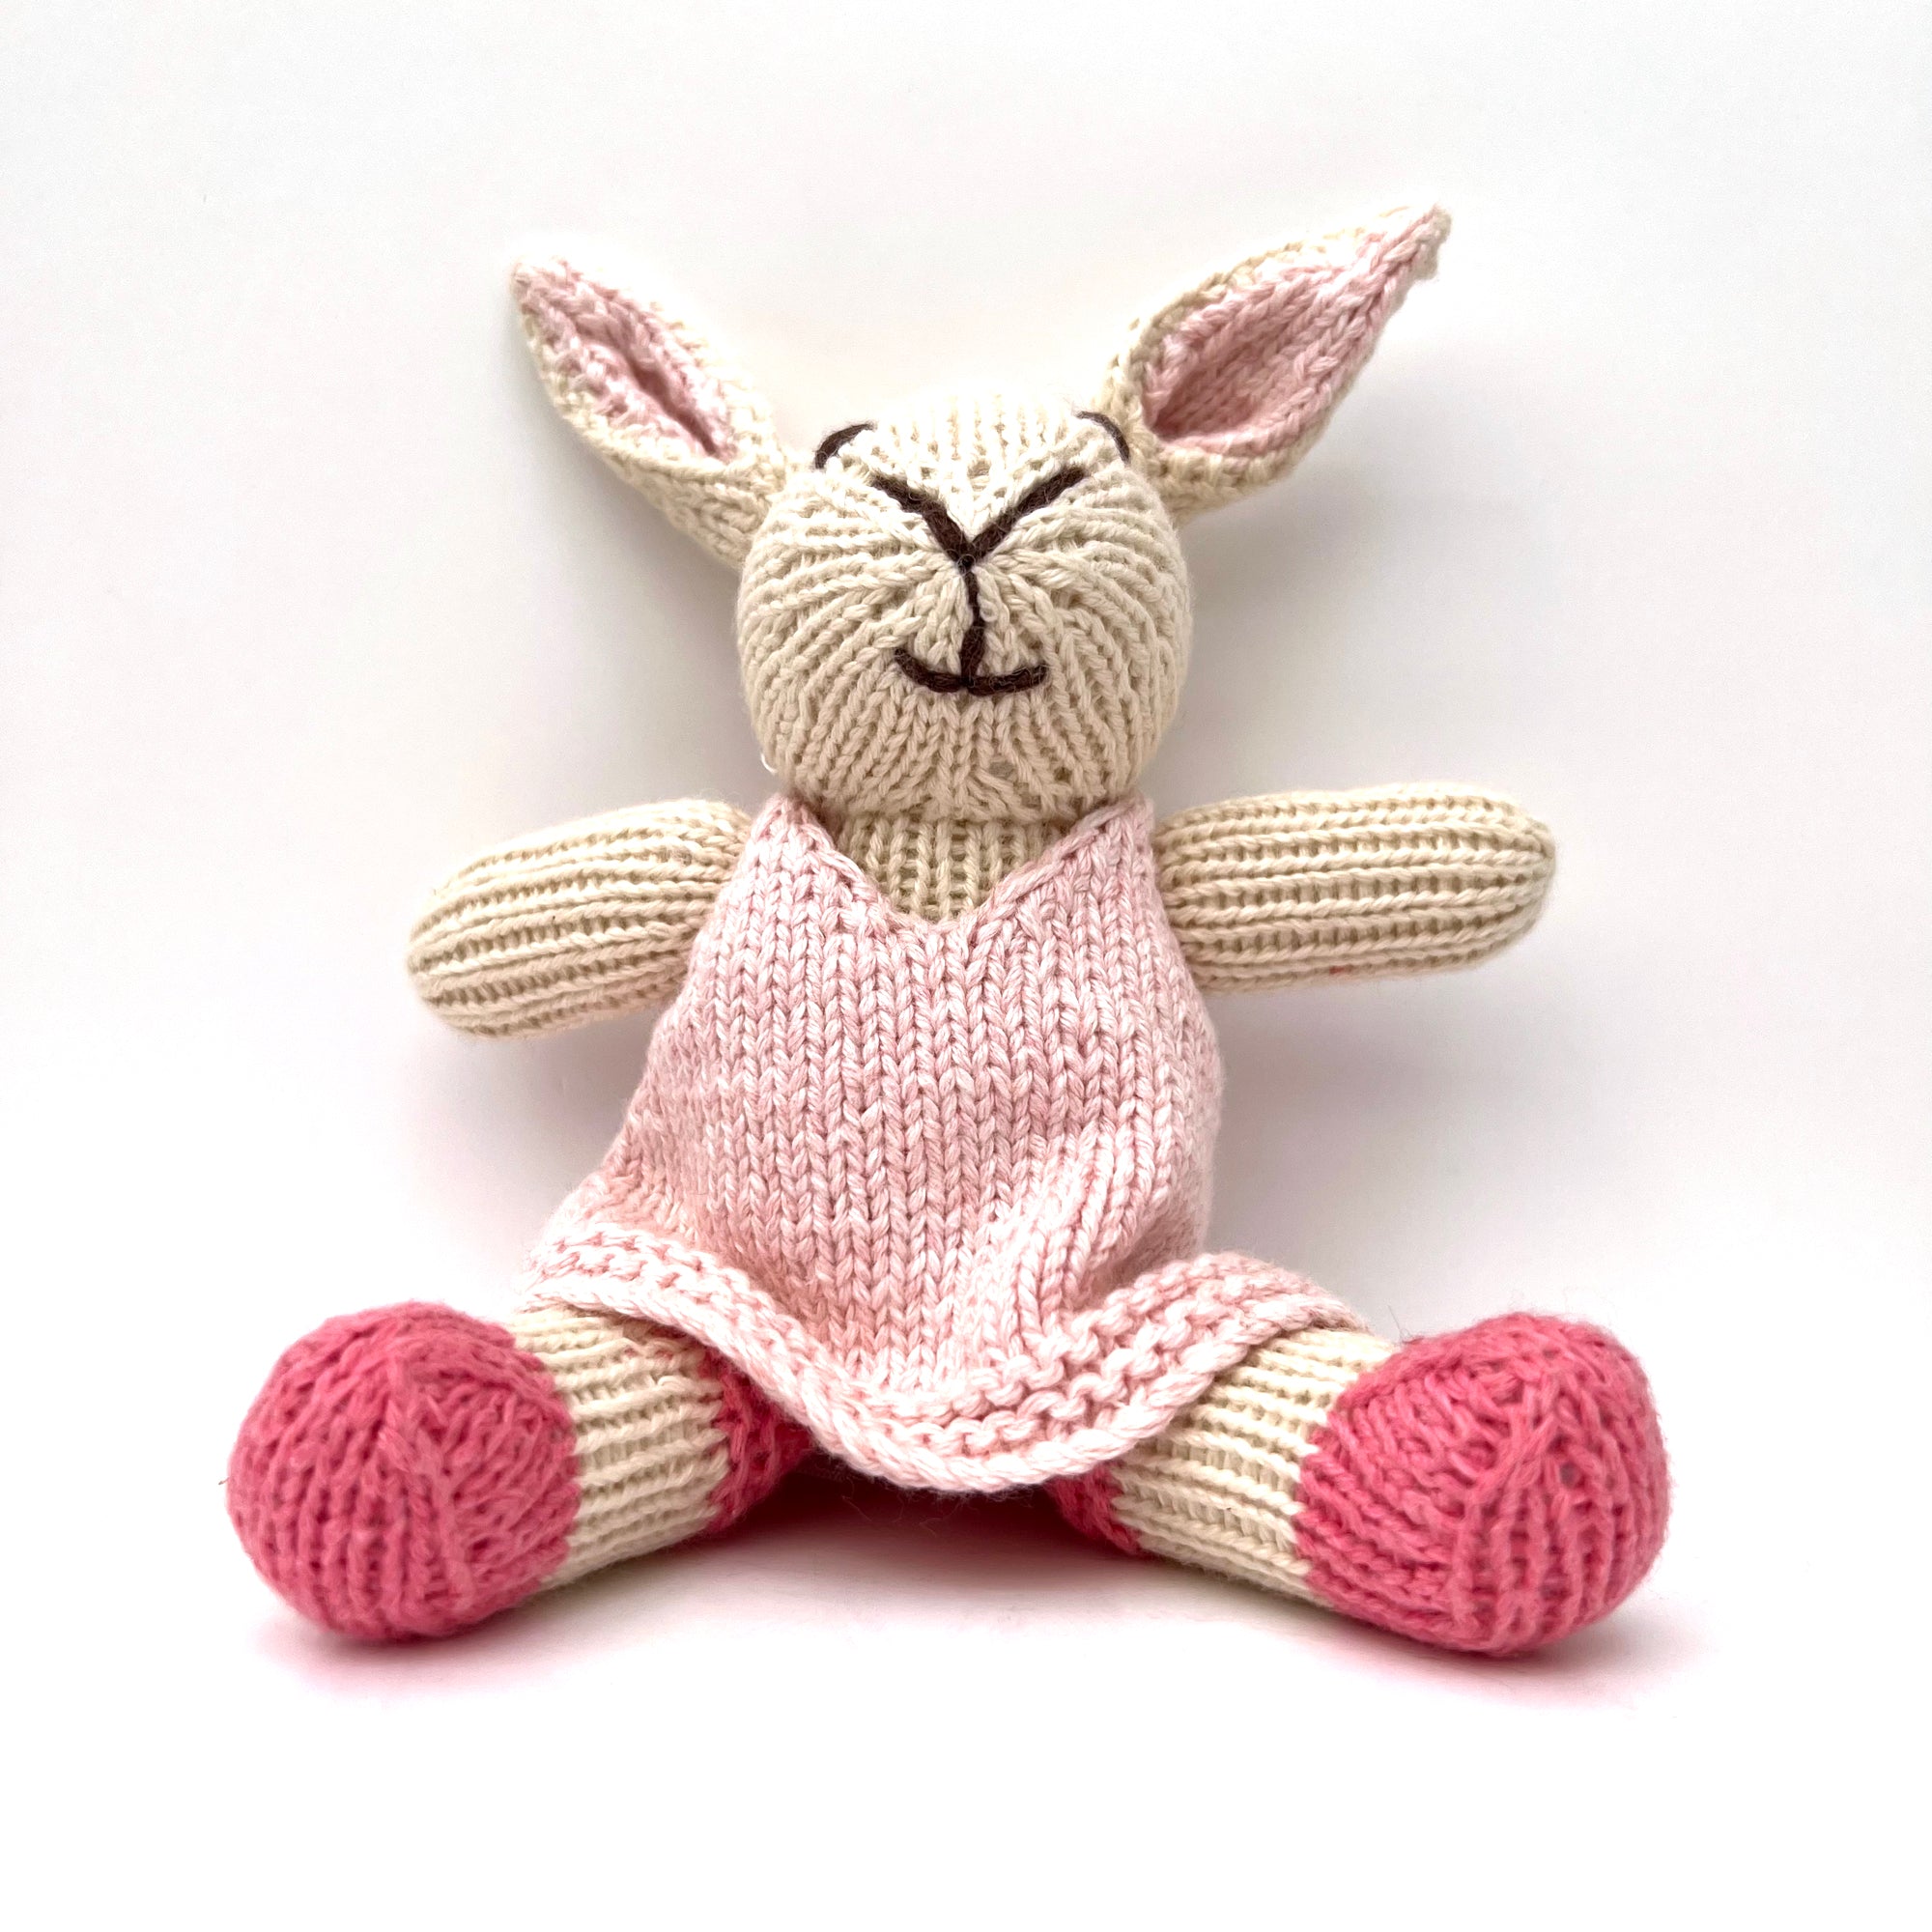 knitted soft rabbit toy in a pink dress 